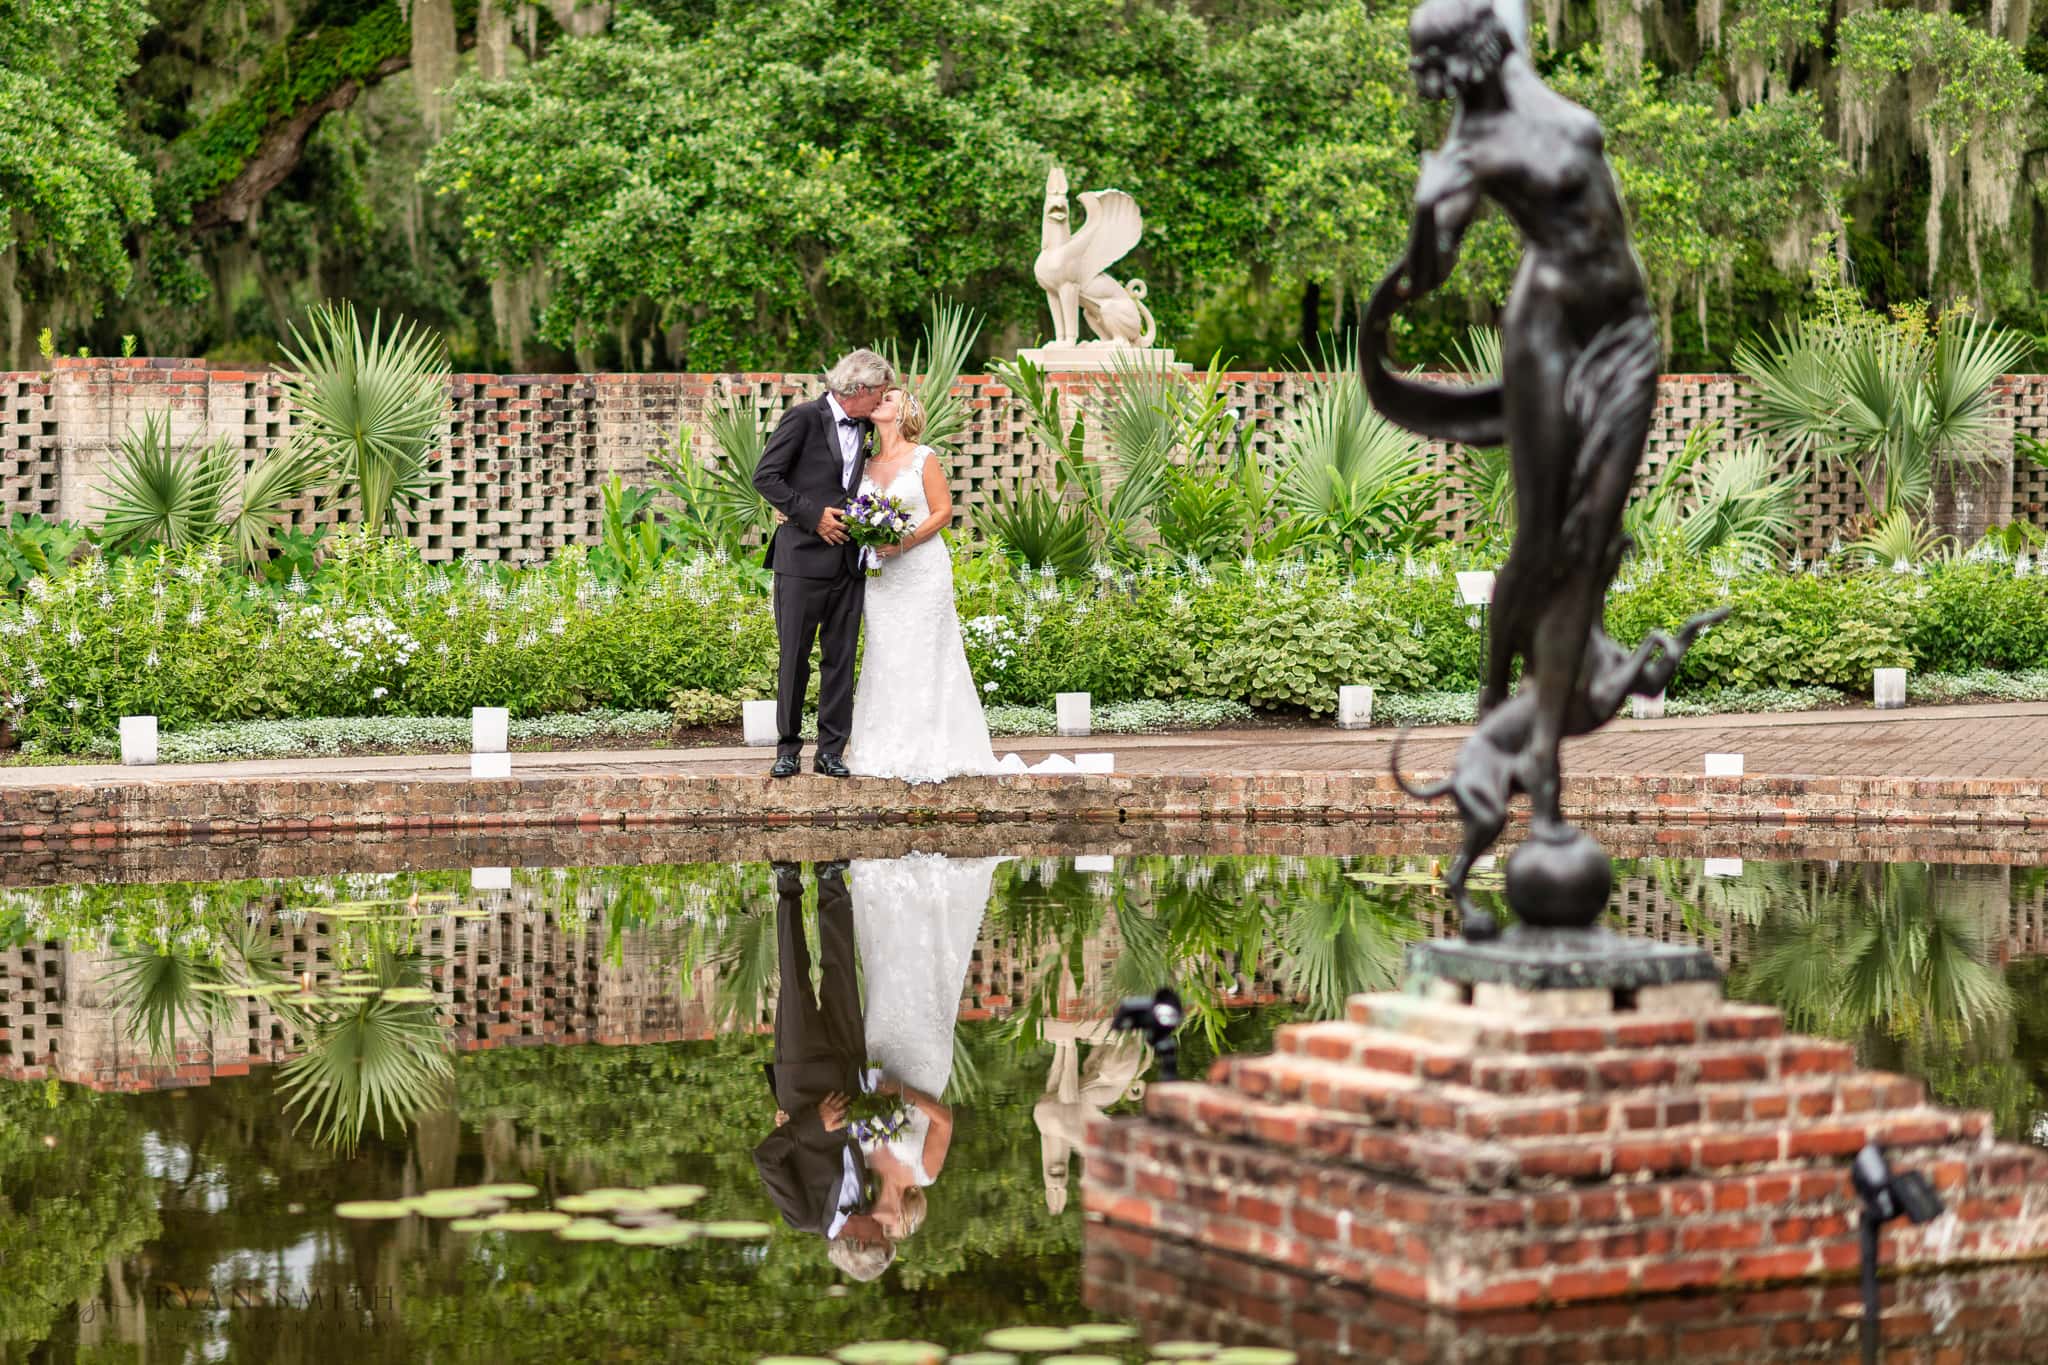 Reflections in the water - Diana of the Chase Pool - Brookgreen Gardens